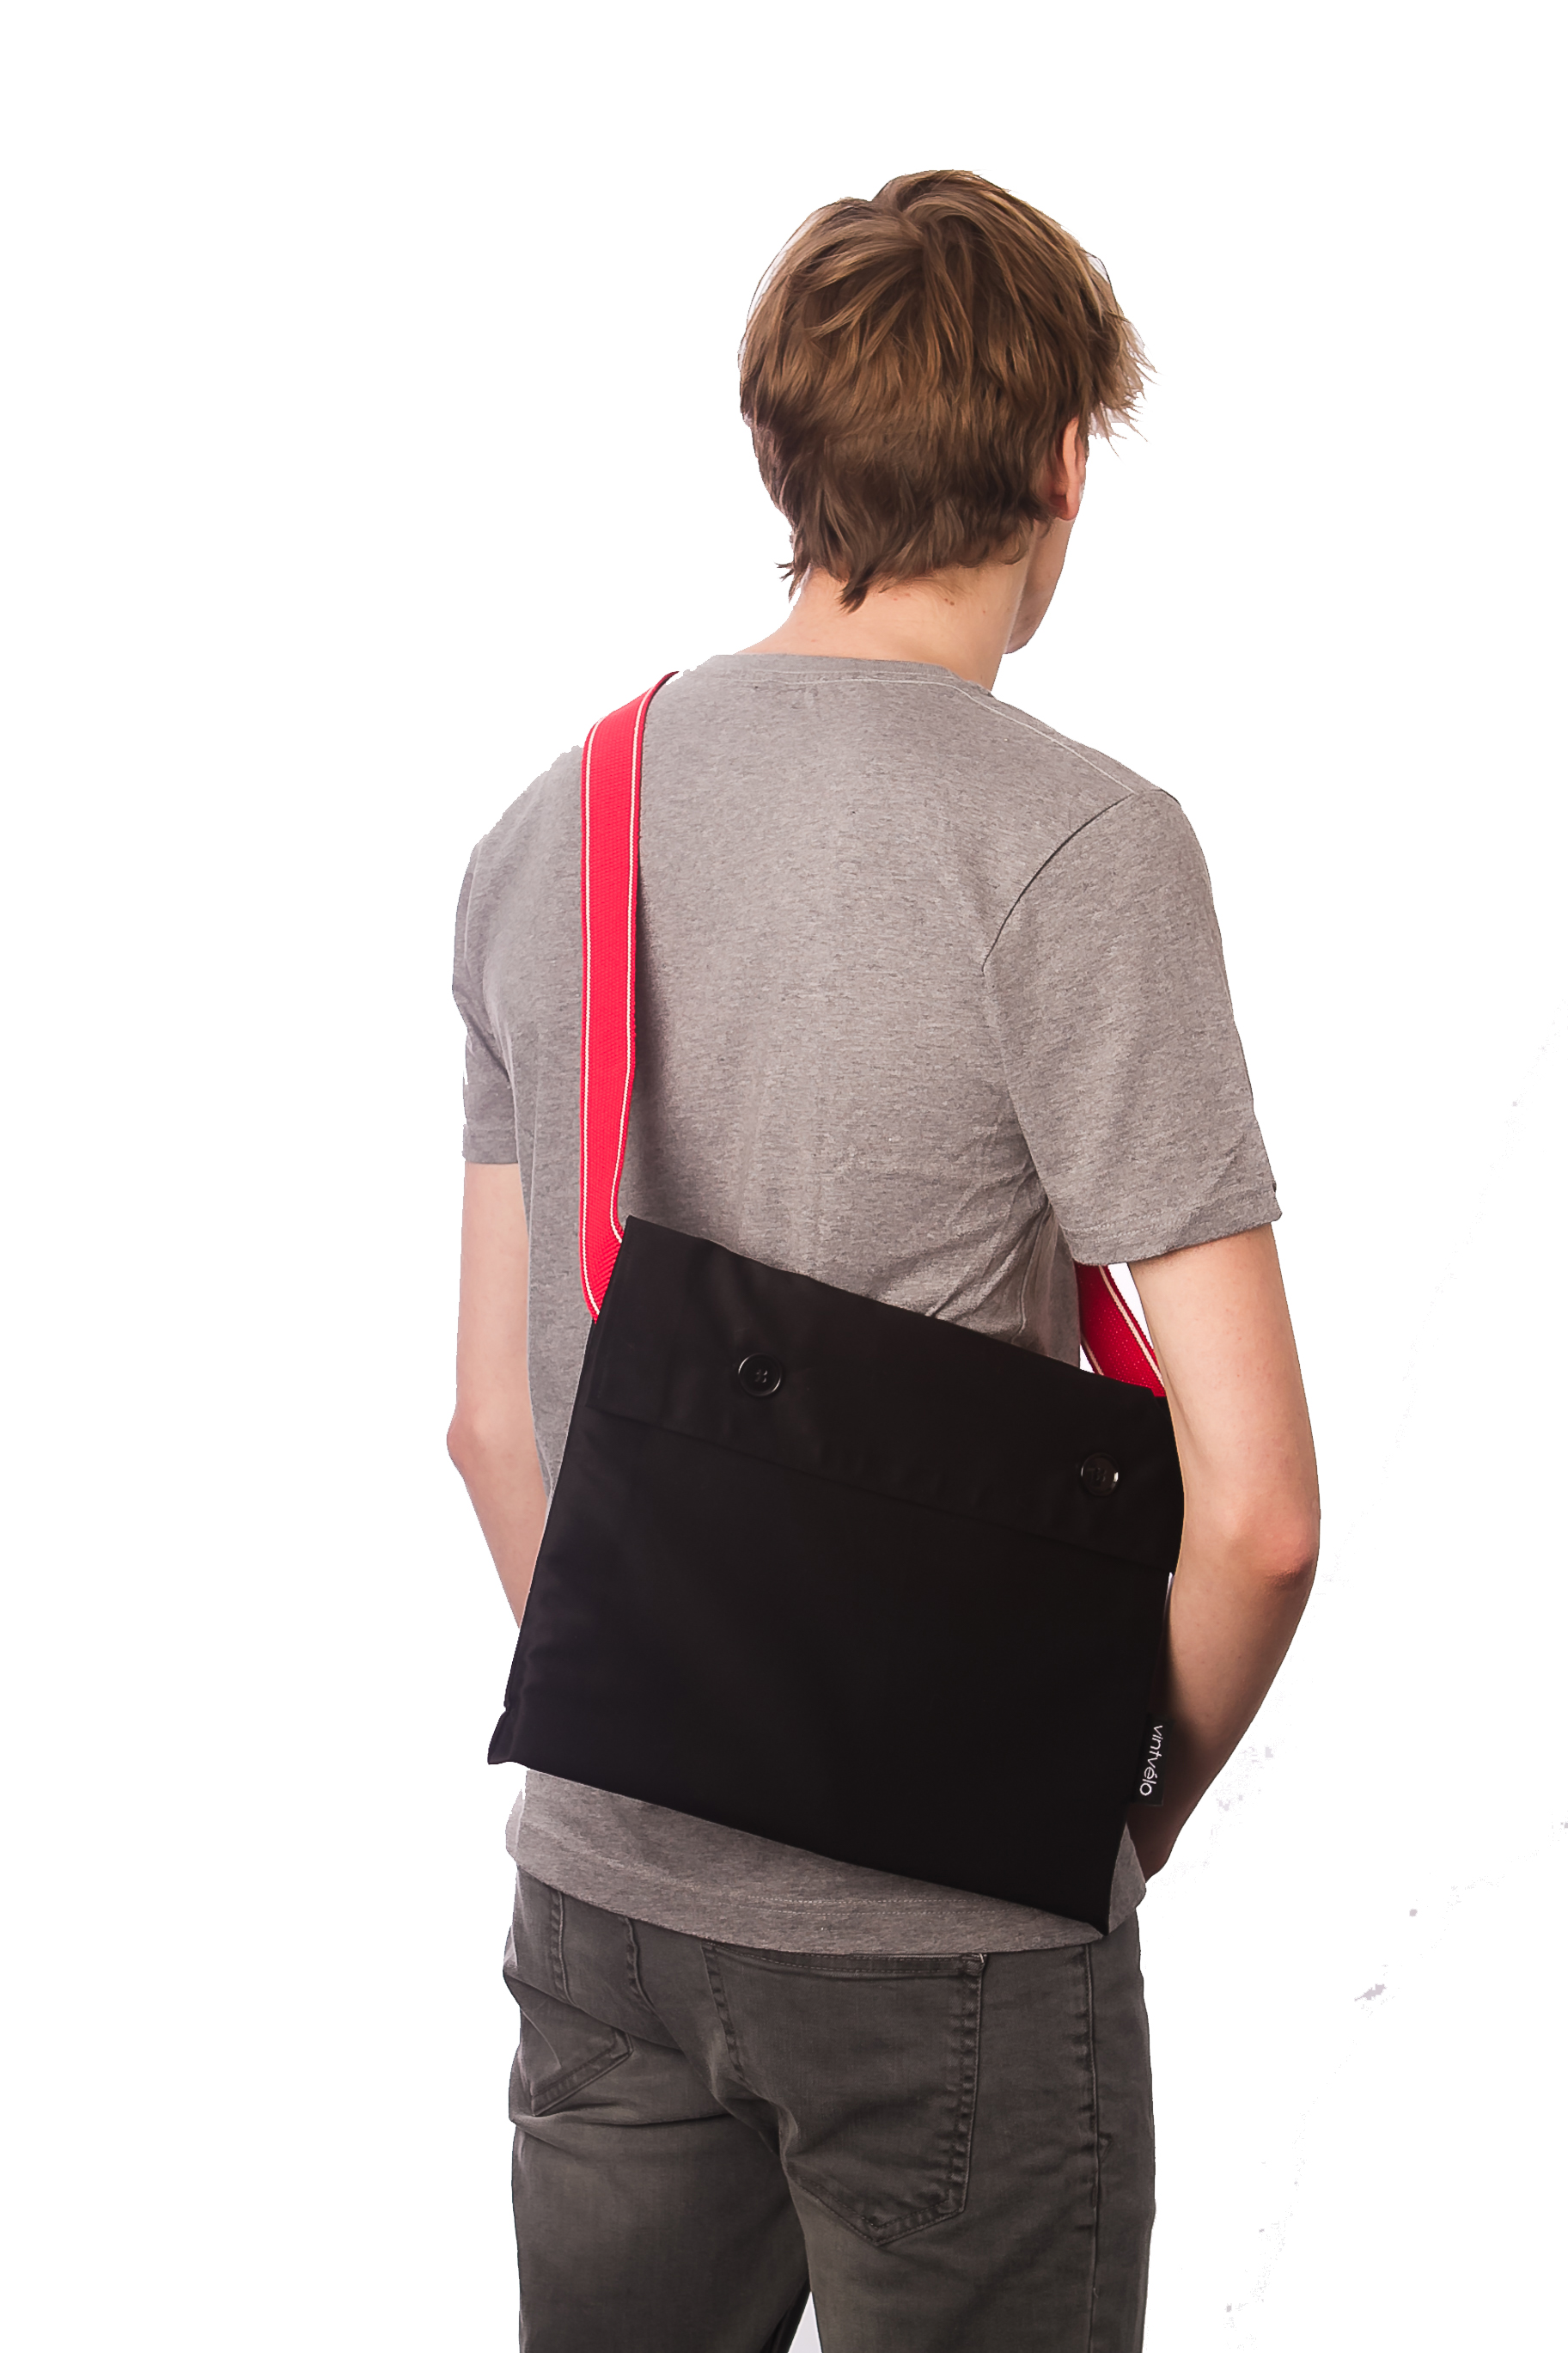 Cycling musette bag – Buttons and red strap – vintvélo